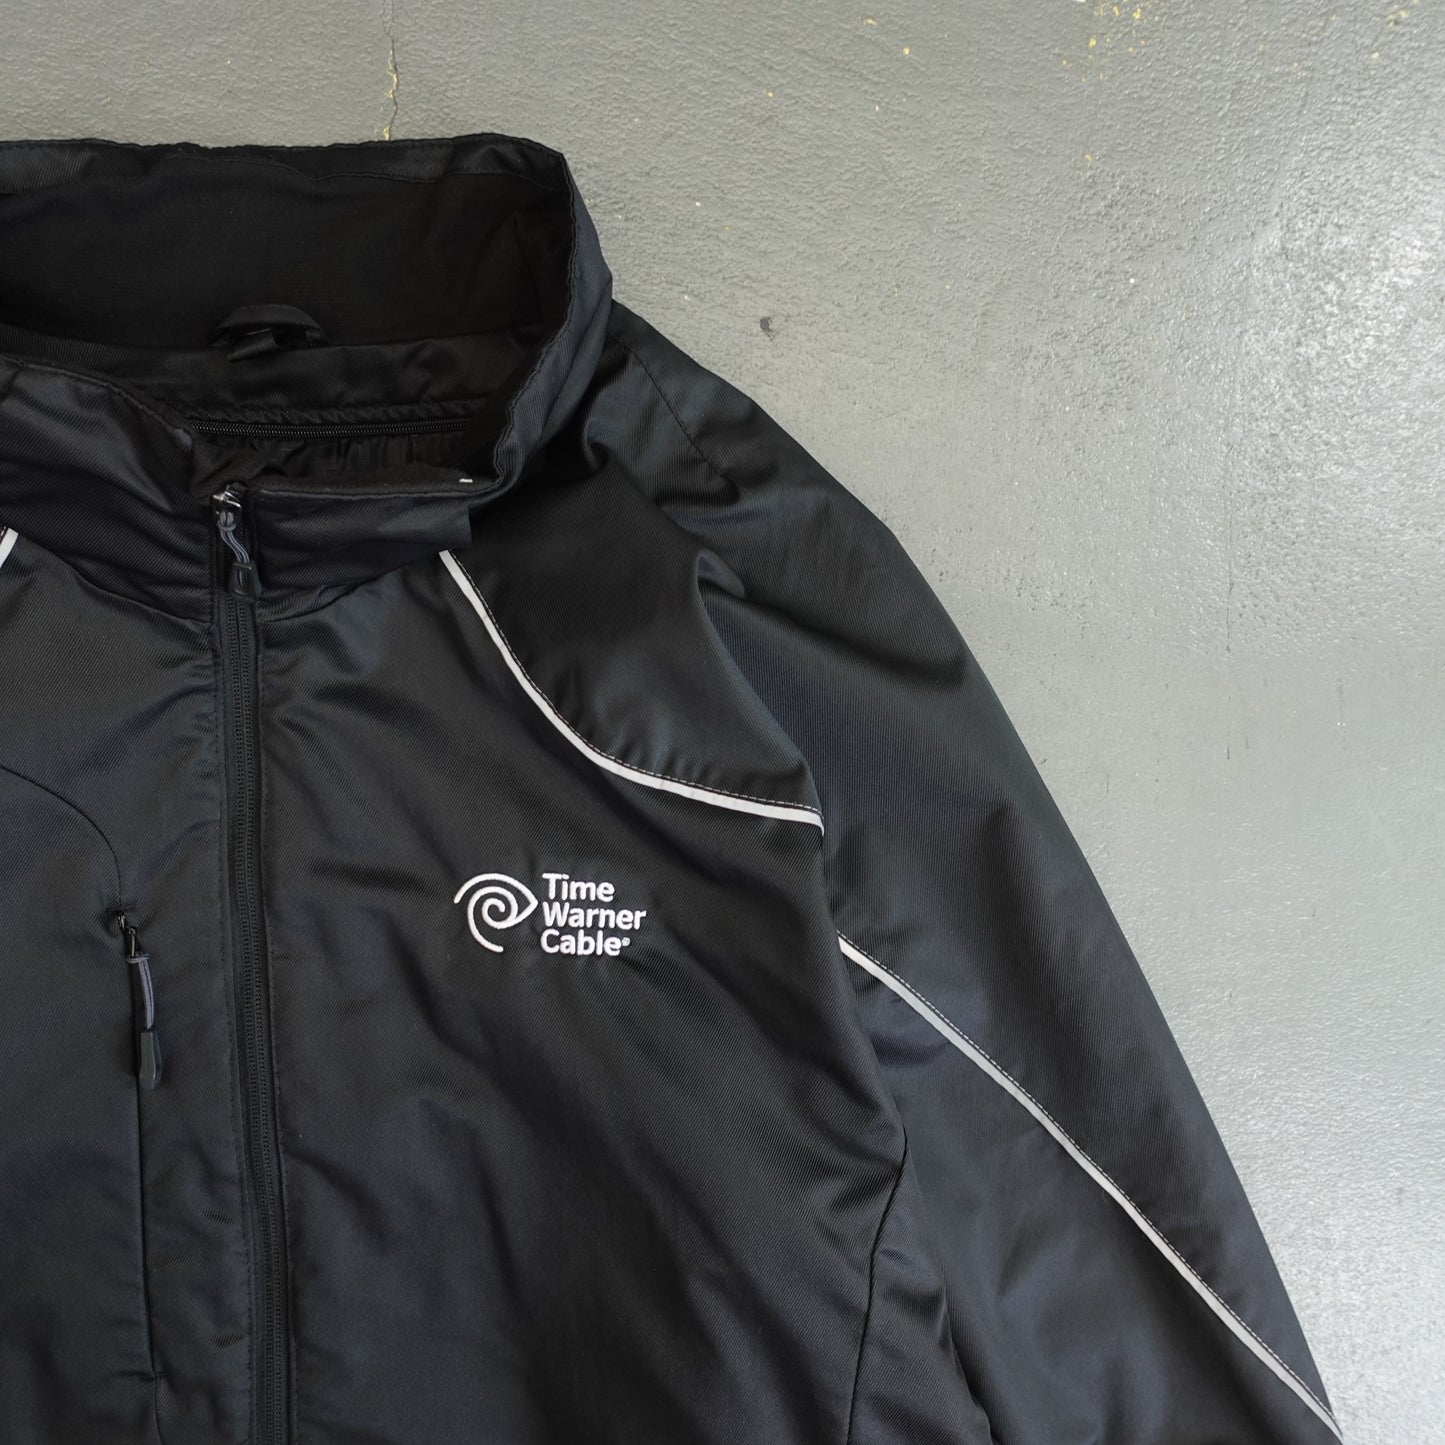 Time Warner Cable Employee's Jacket